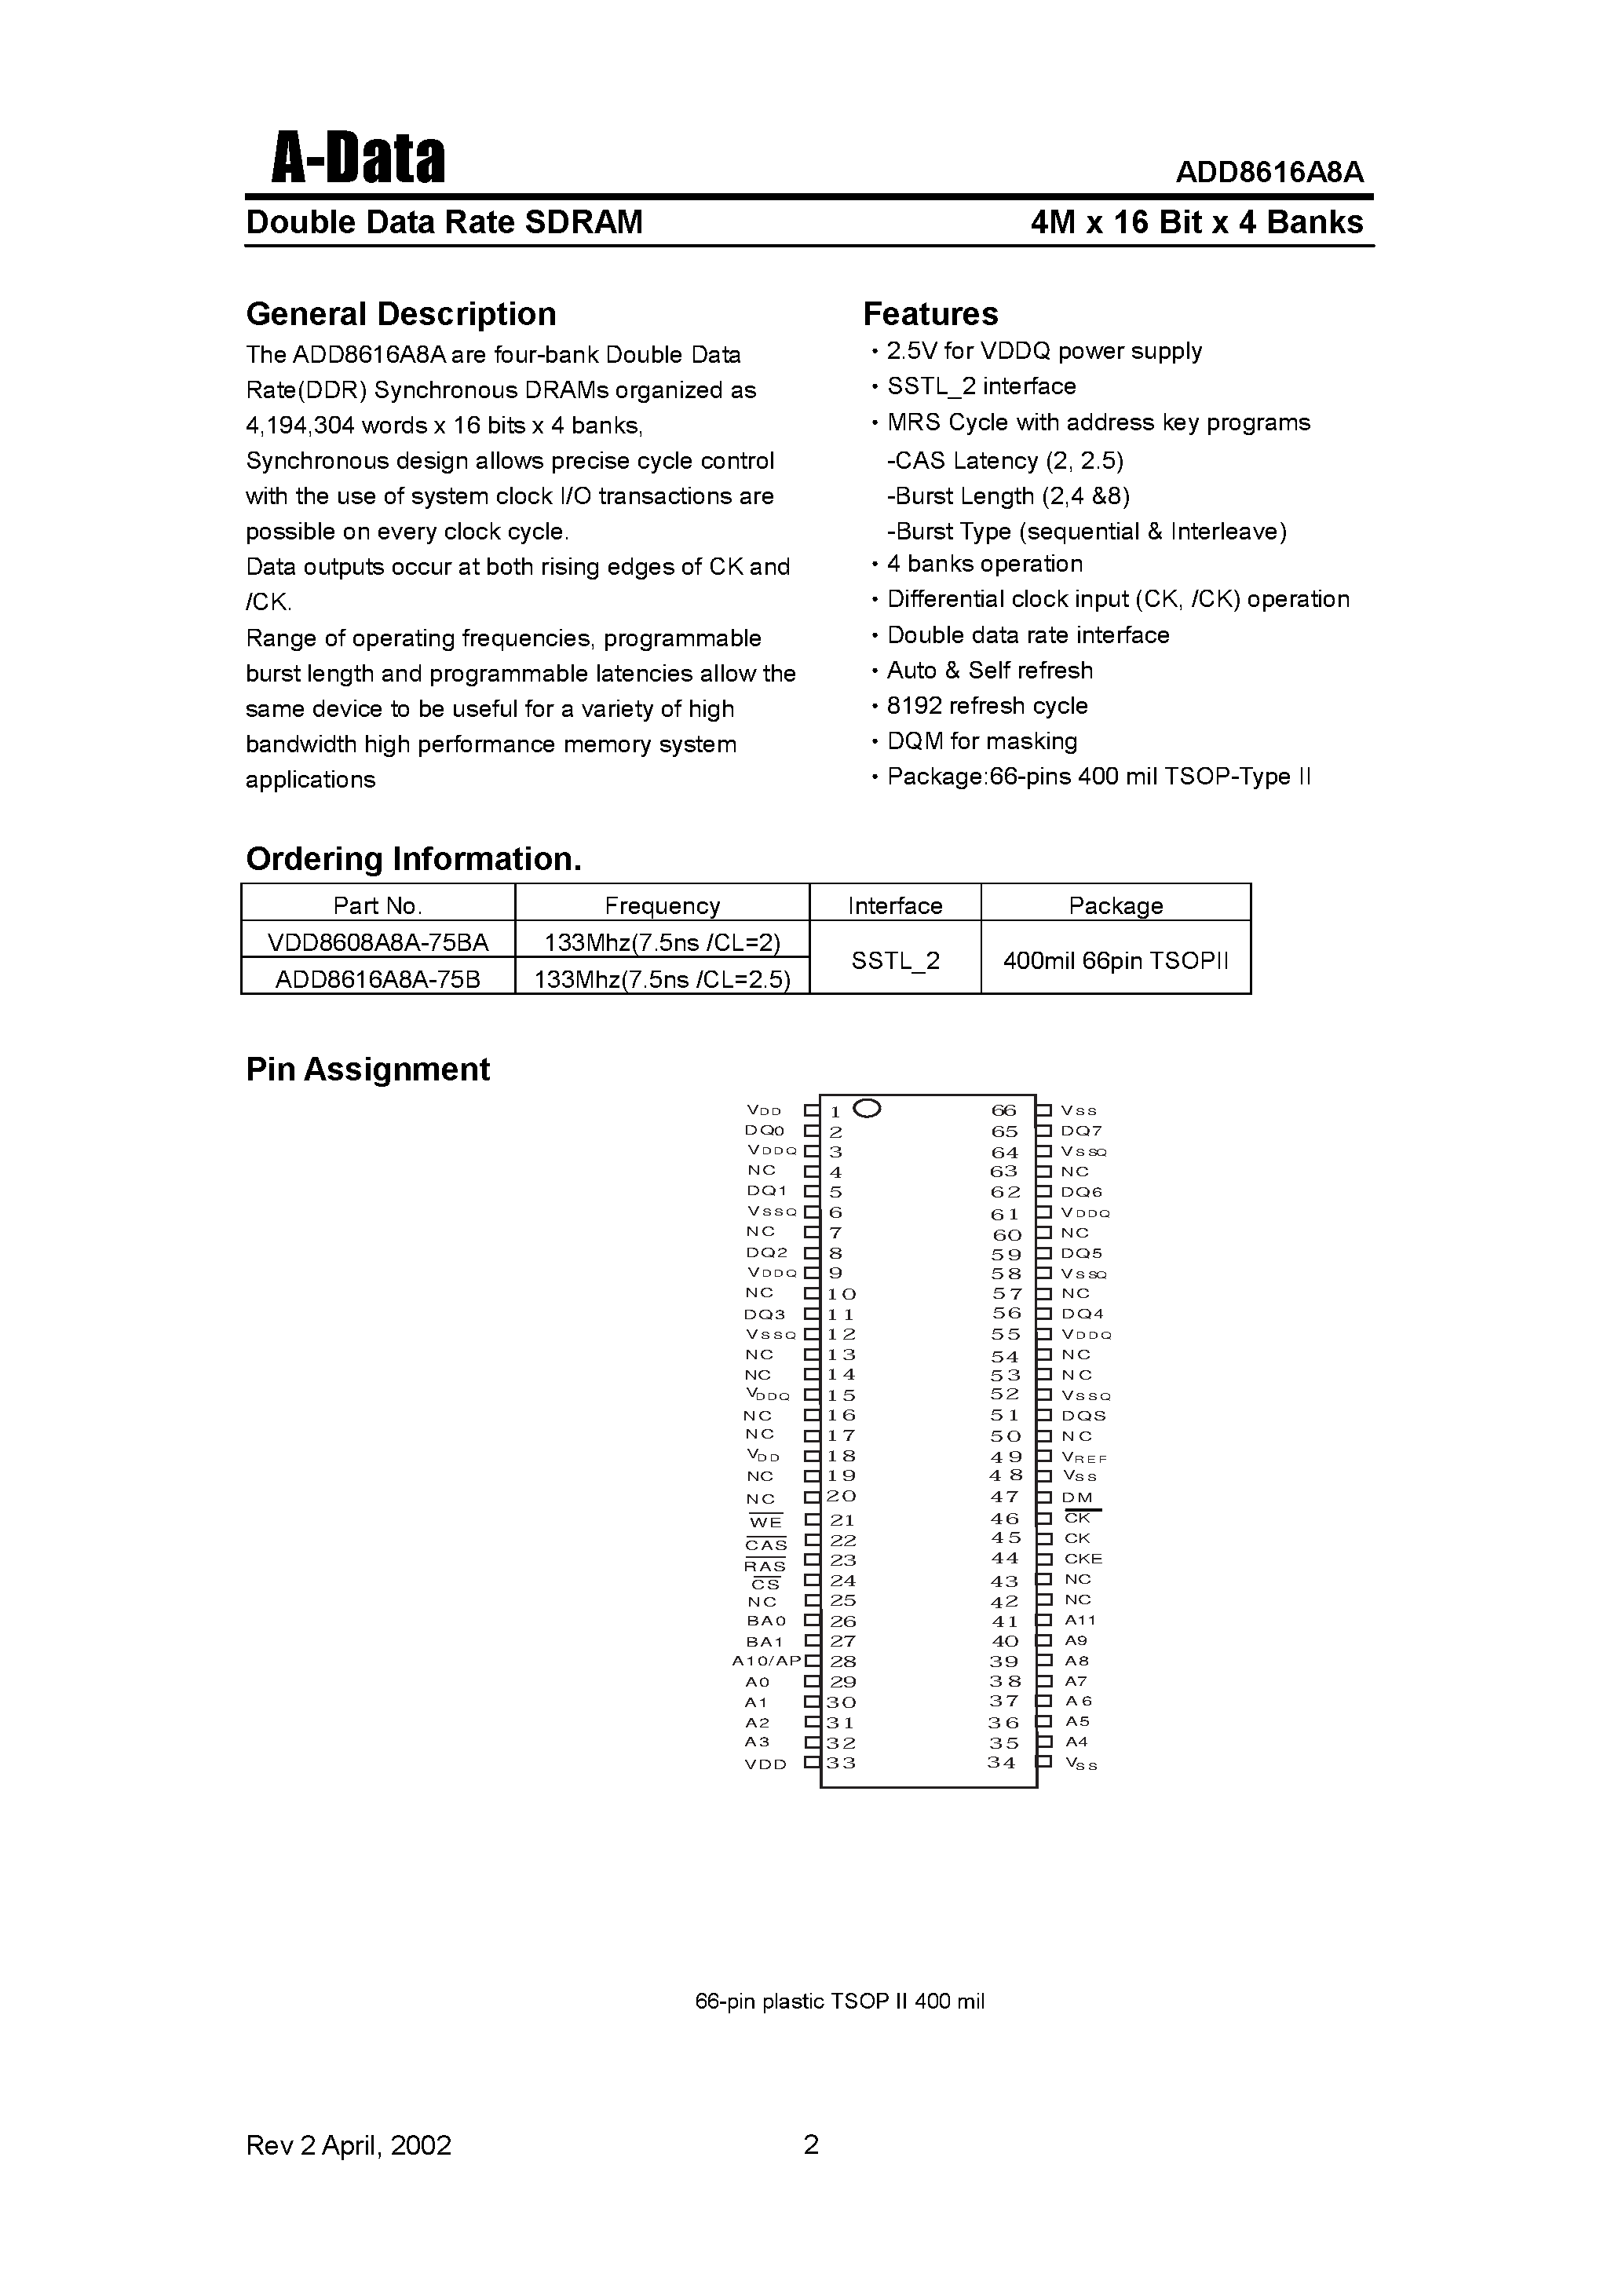 Datasheet ADD8616A8A - DOUBLE DATA RATE SDRAM page 2